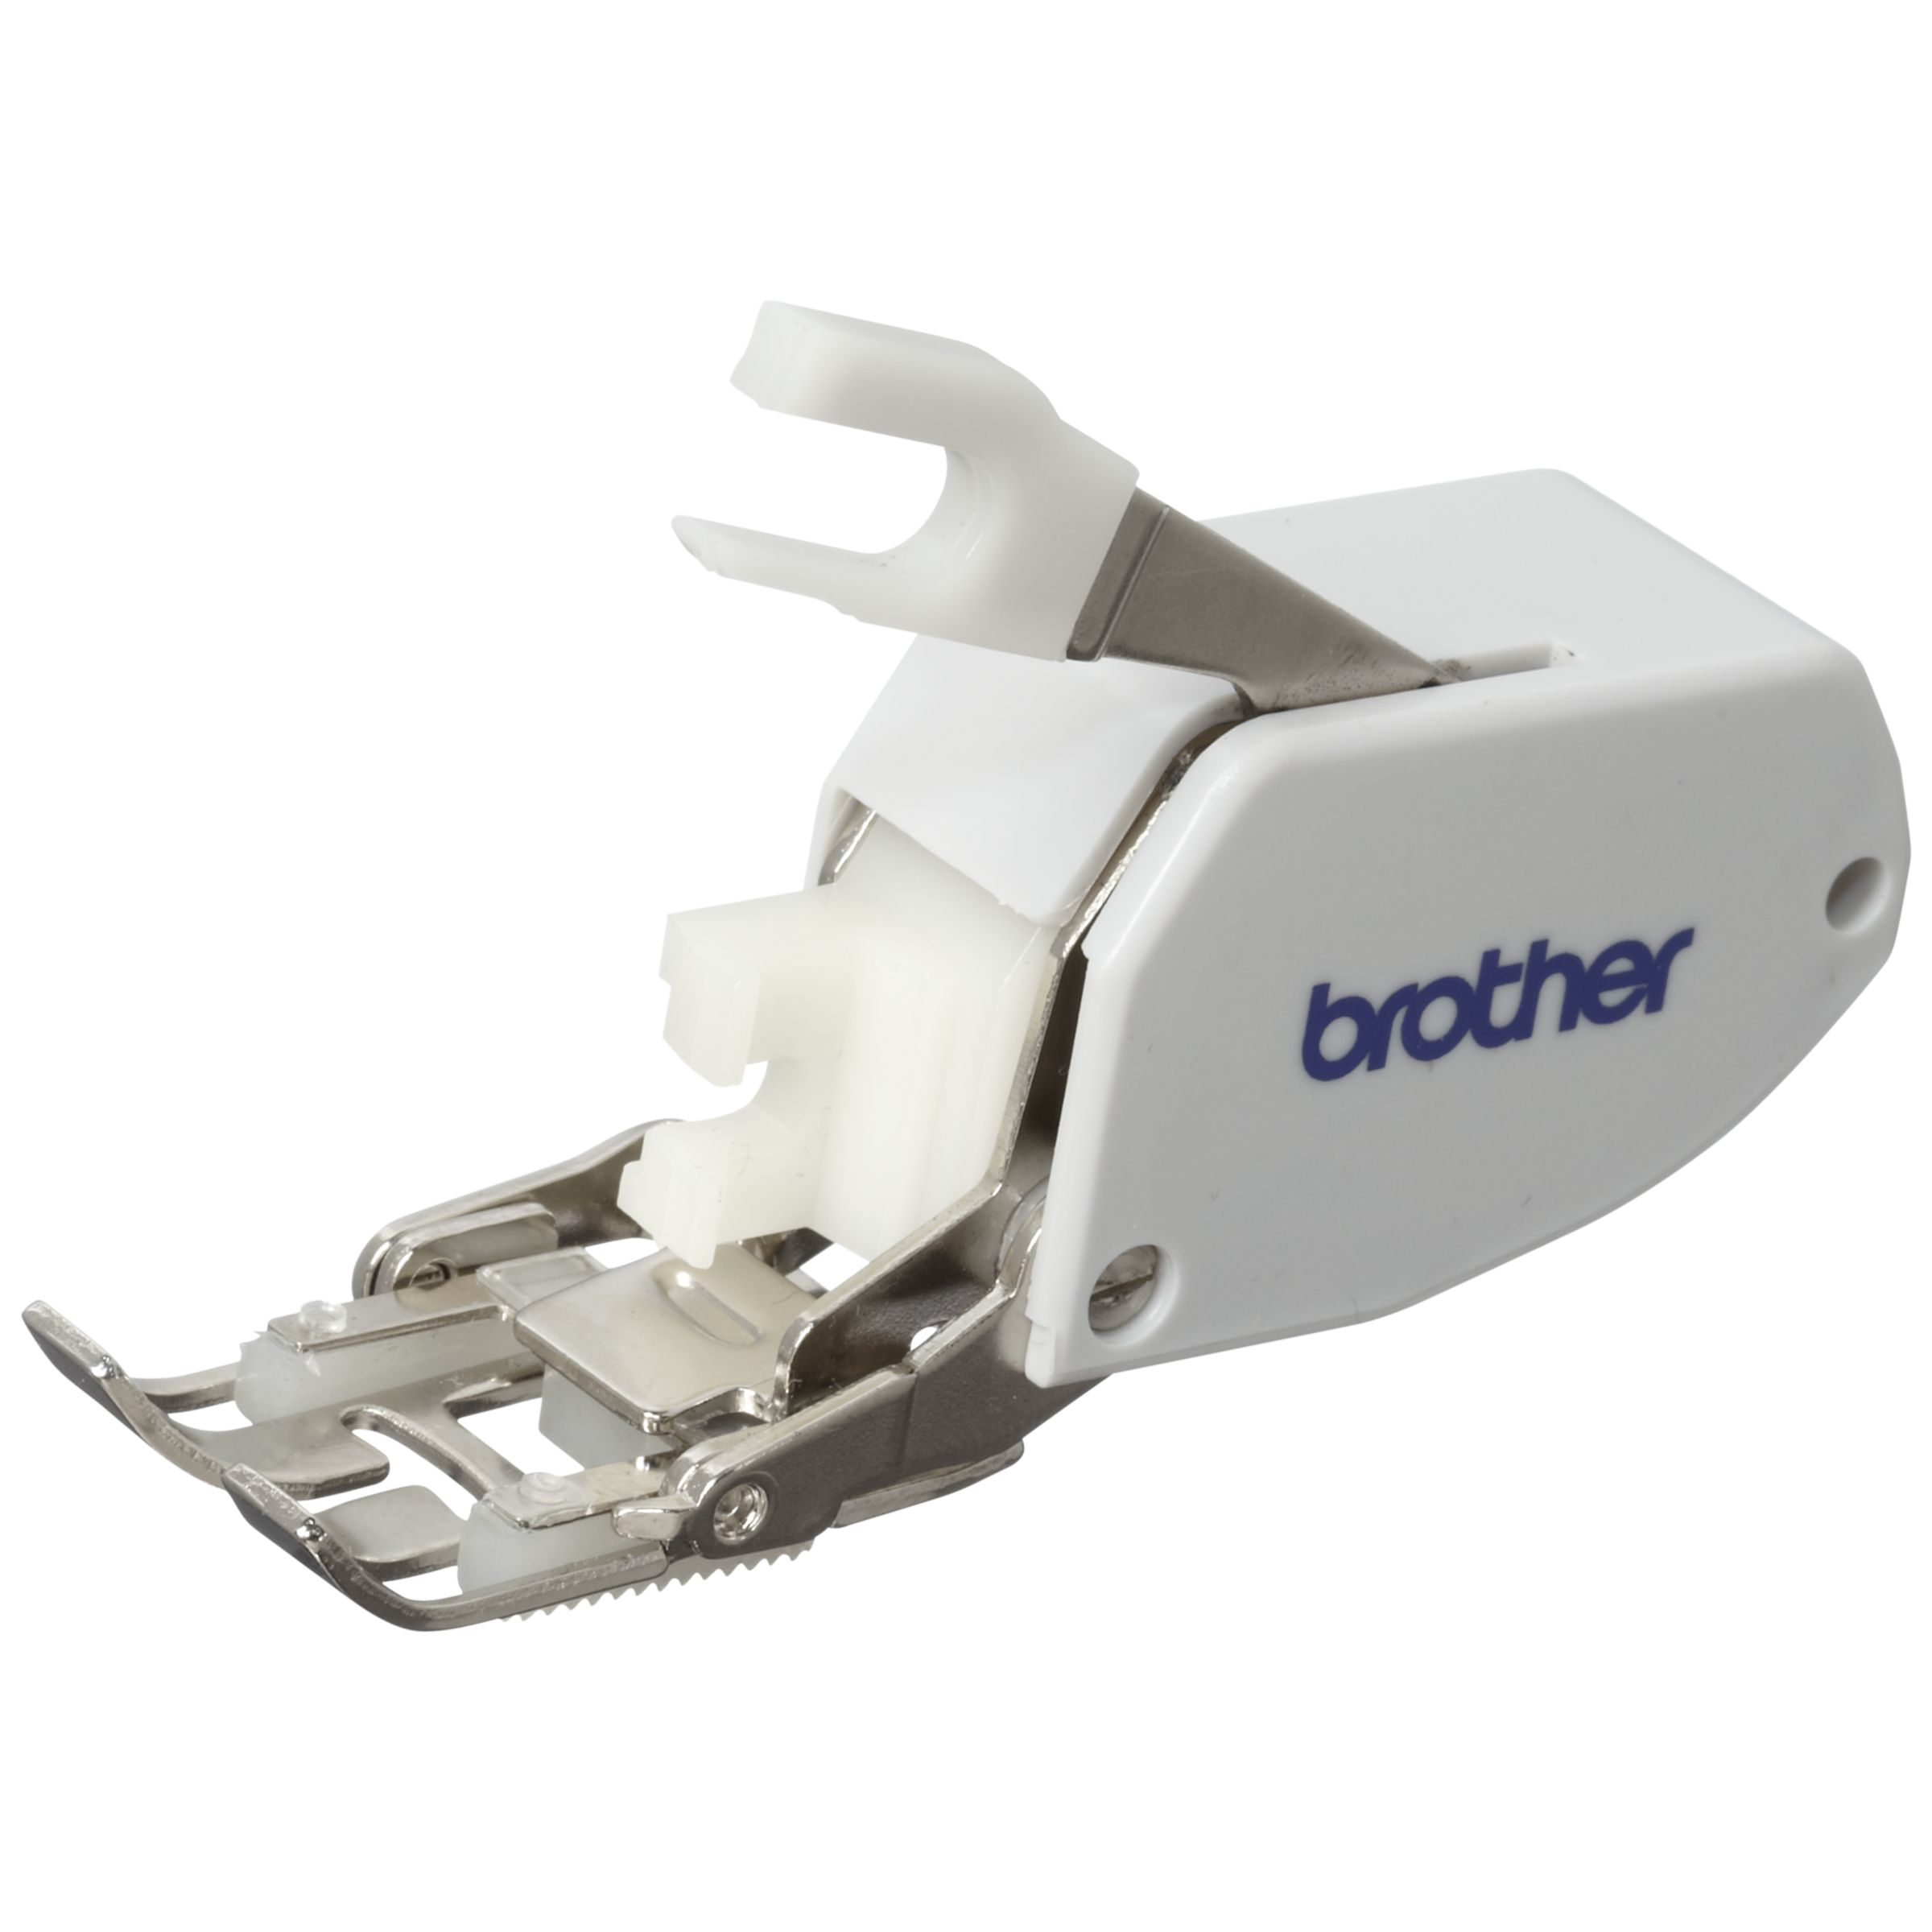 BROTHER B797 WALKING FOOT SEWING MACHINE / WALKING FOOT MESIN JAHIT,  Hobbies & Toys, Stationery & Craft, Occasions & Party Supplies on Carousell